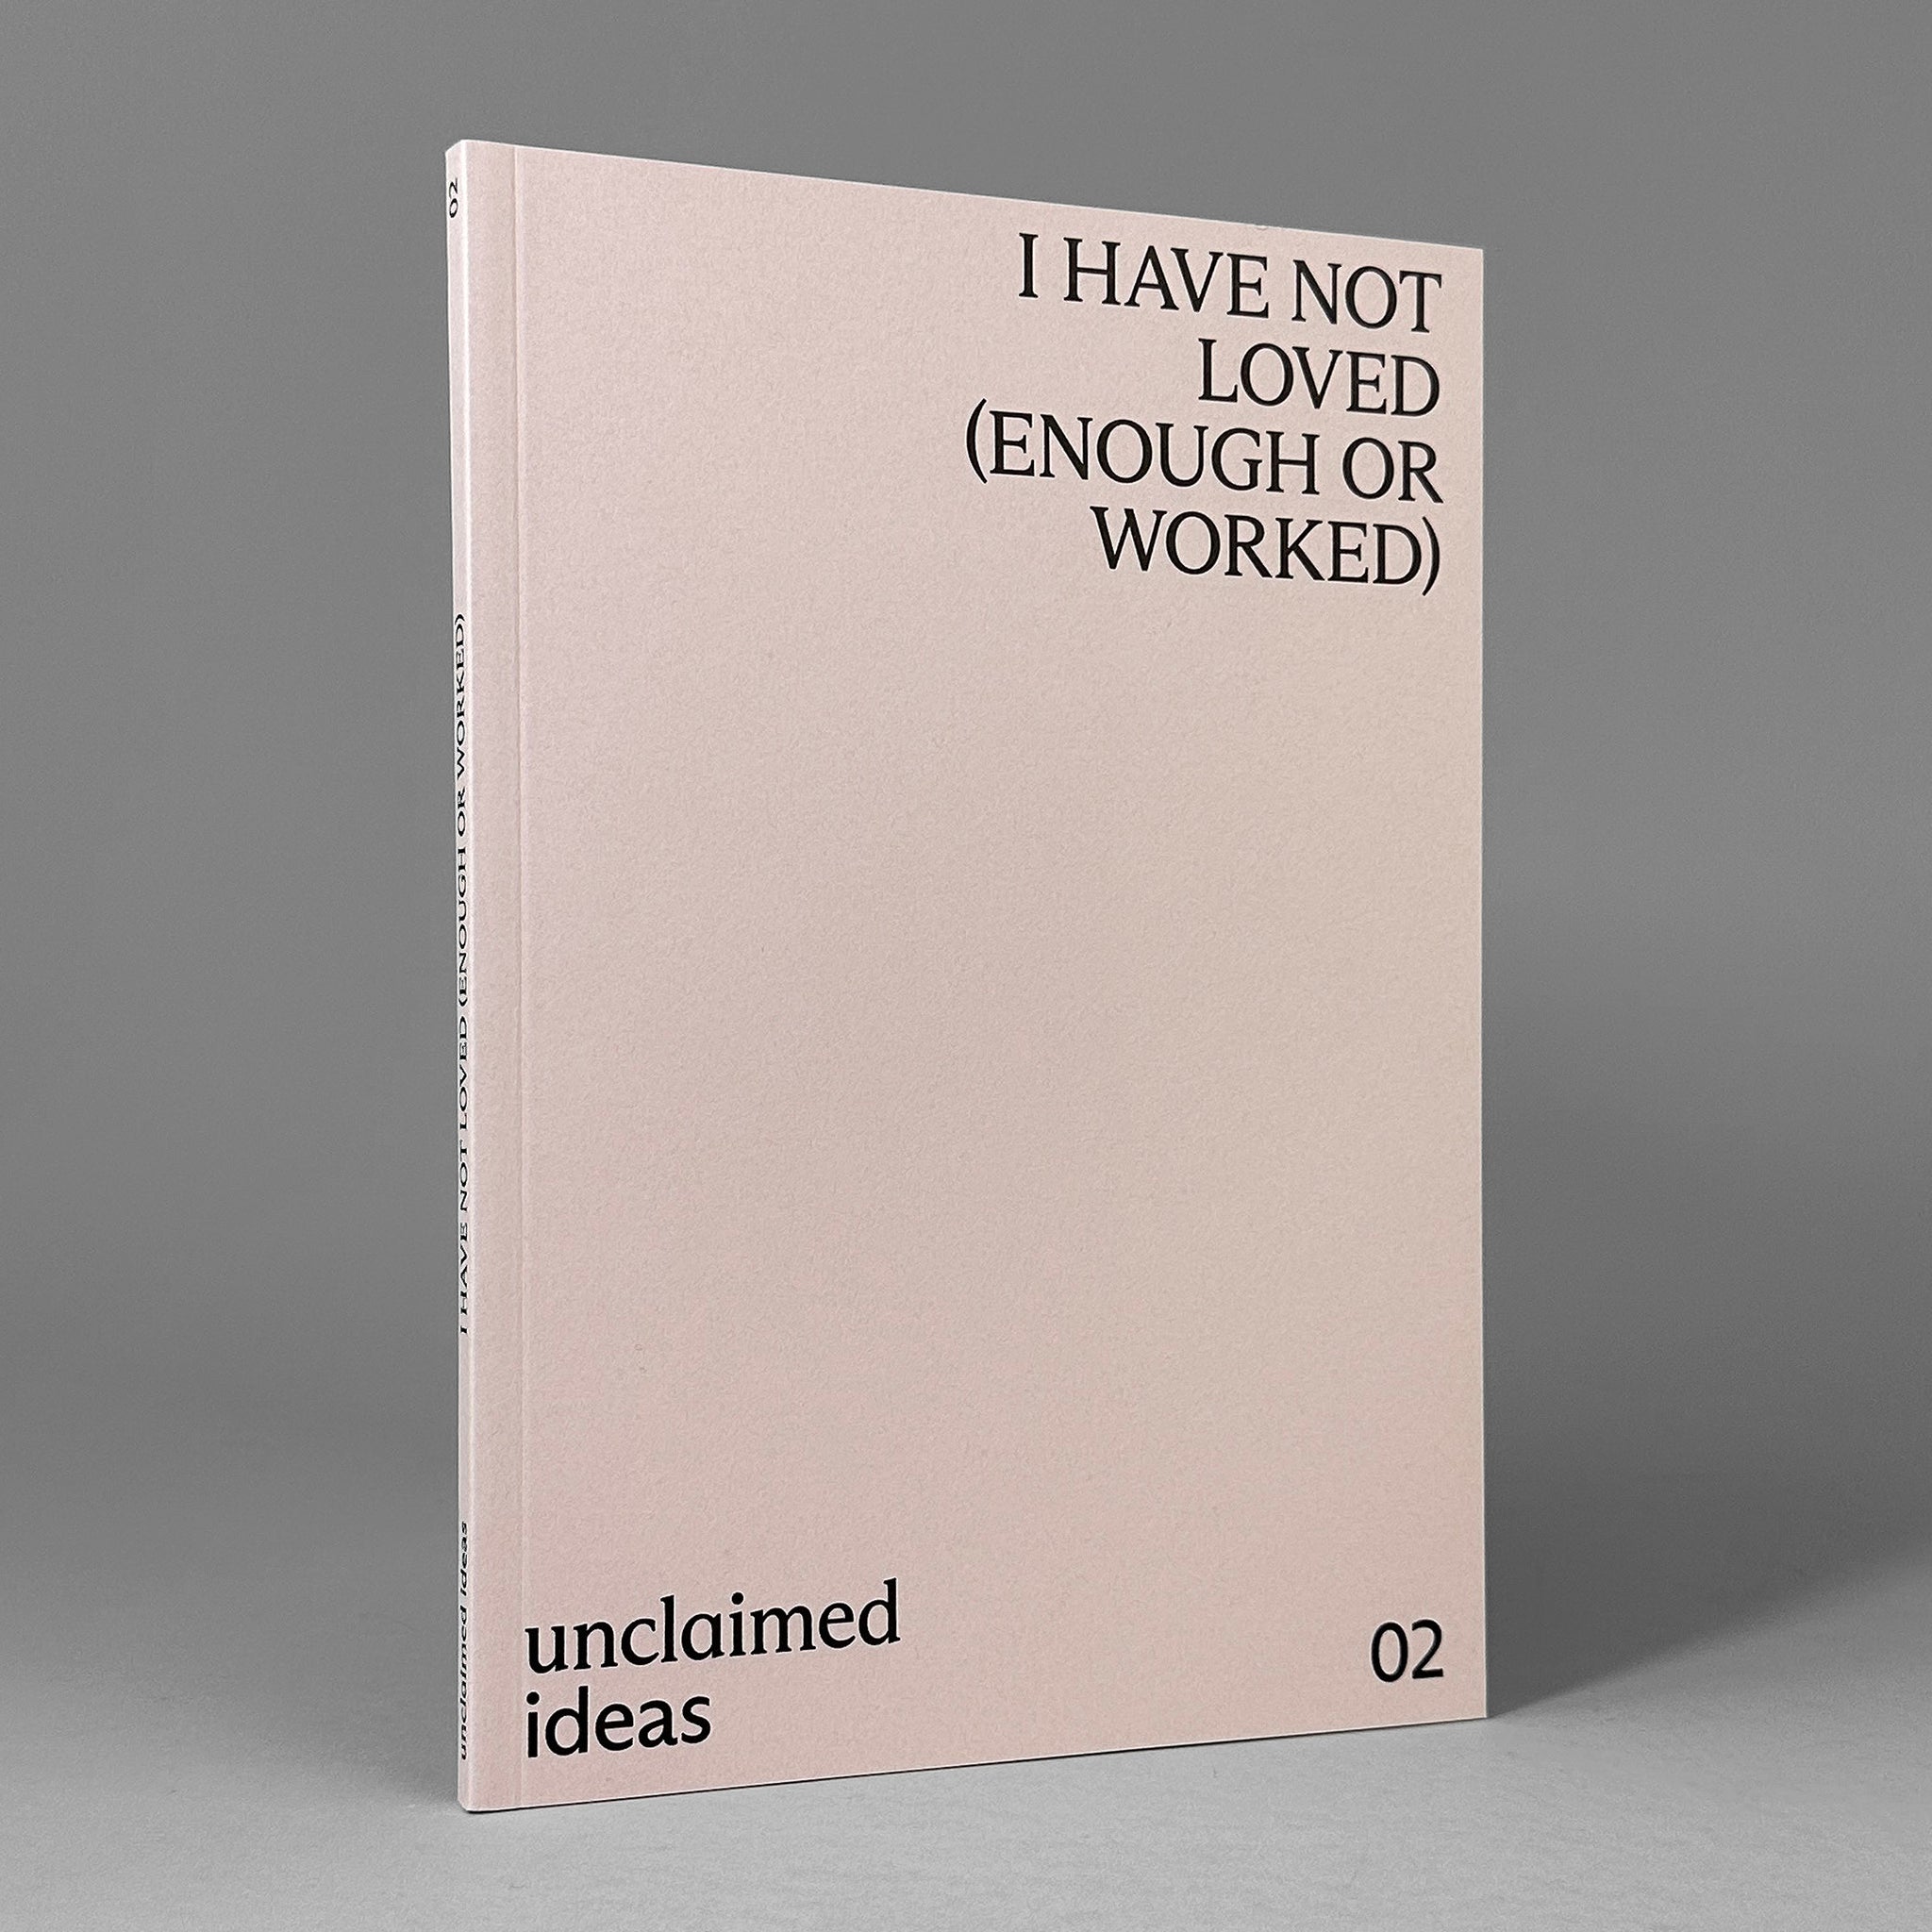 I Have Not Loved (Enough or Worked)